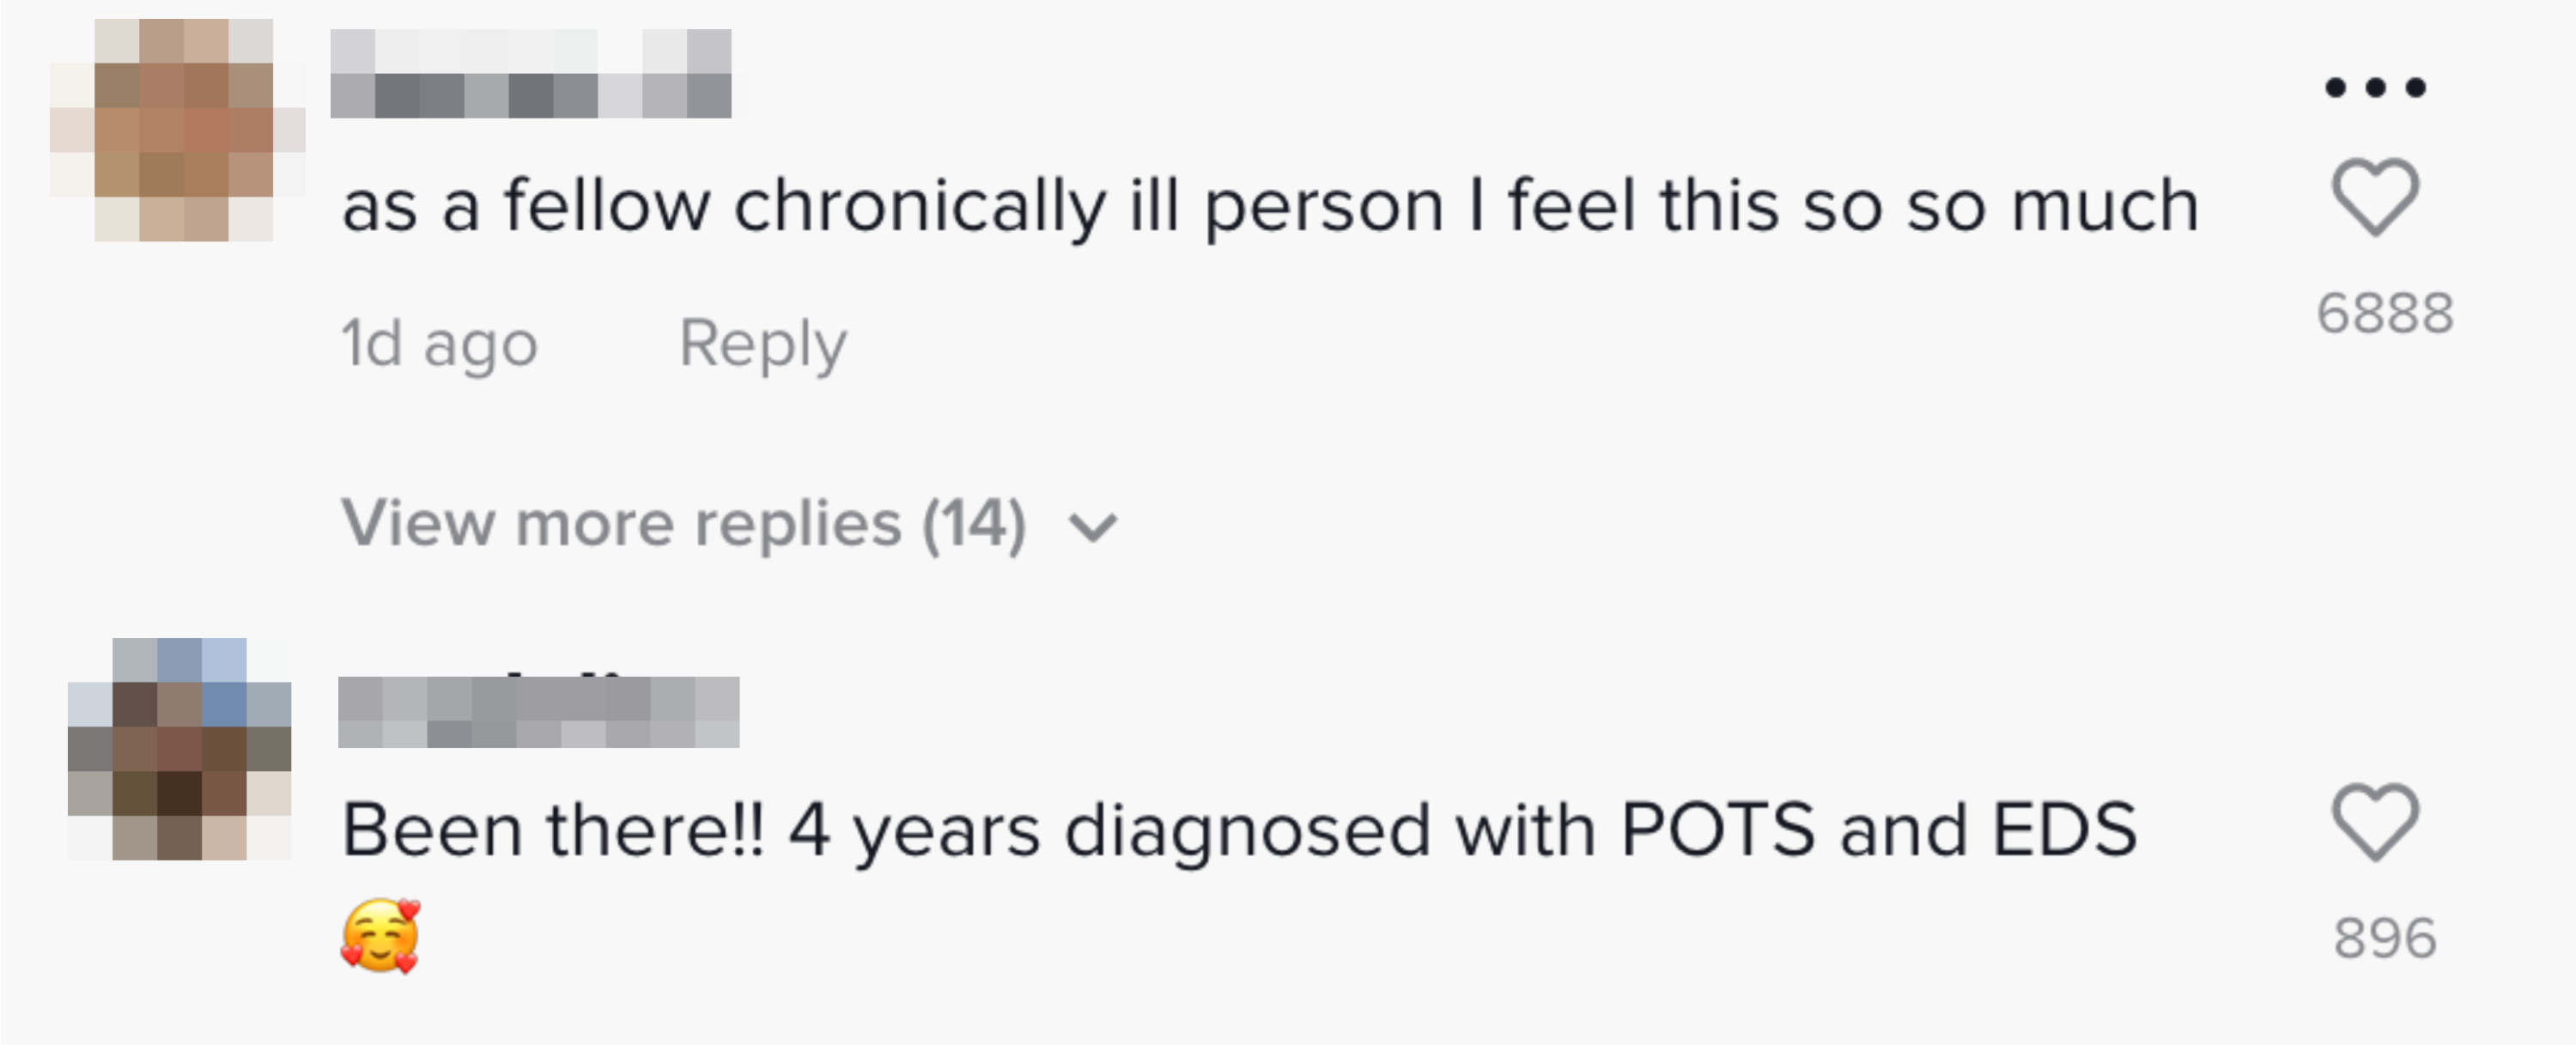 Two commenters who are chronically ill or have the same conditions as Halsey say they know the feeling